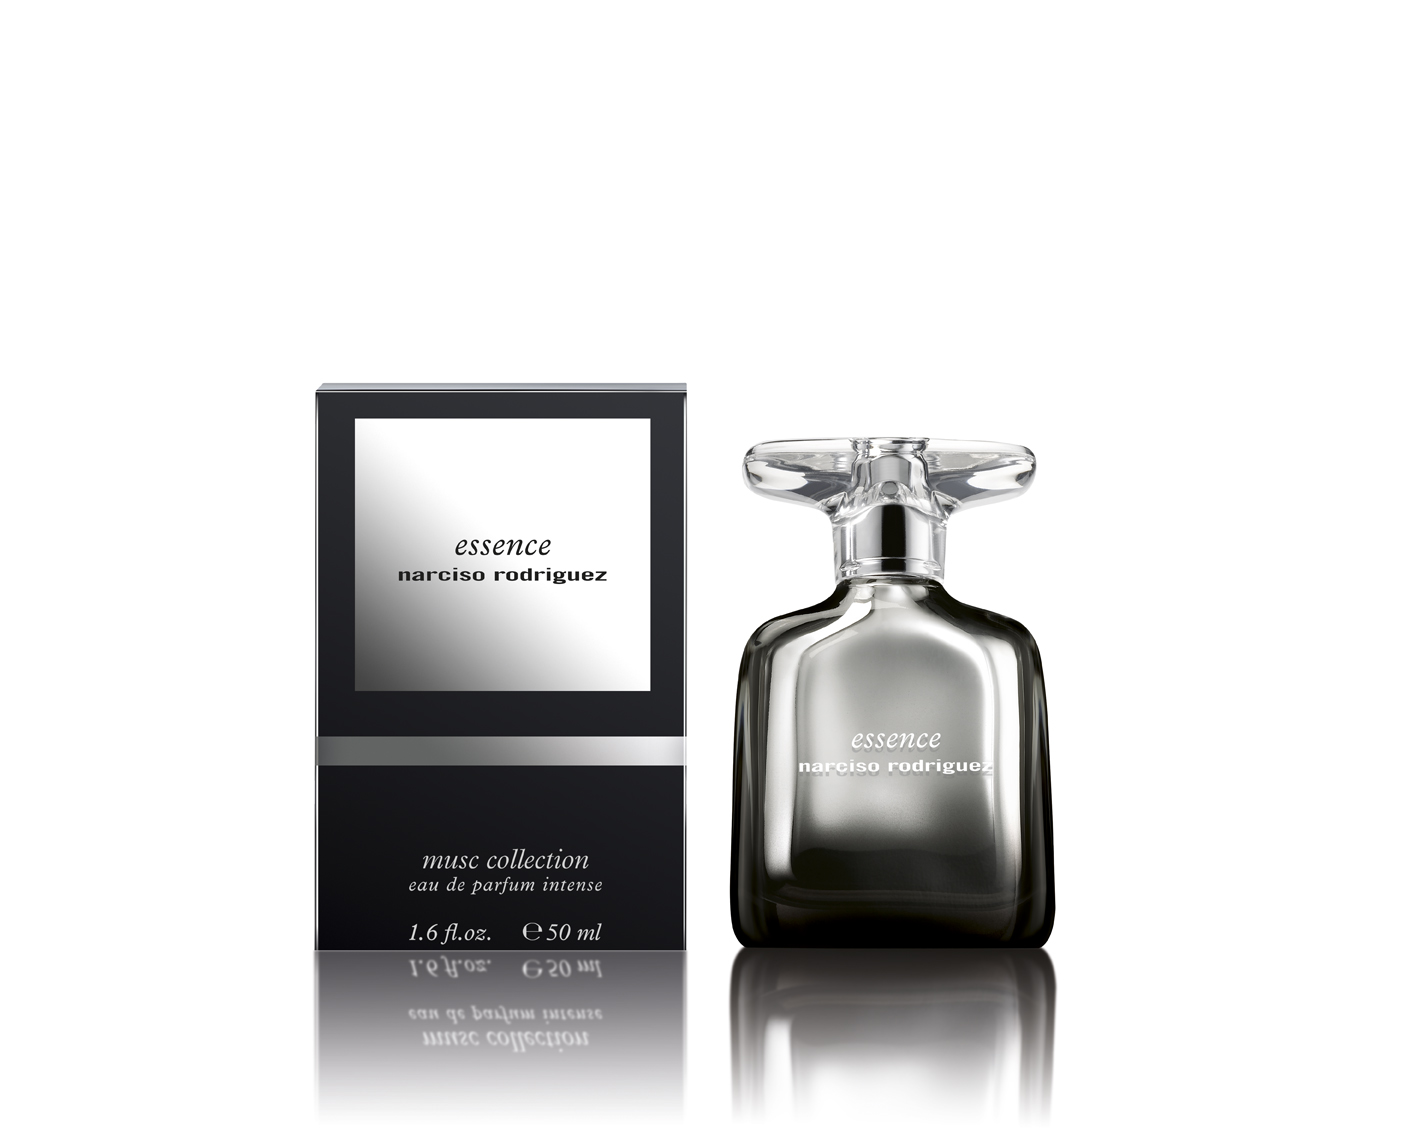 All of me narciso rodriguez. Narciso Rodriguez Essence de Musk 125. Narciso Rodriguez Musc collection intense. Narciso Rodriguez Musc collection. Narciso Rodriguez Musc collection men.